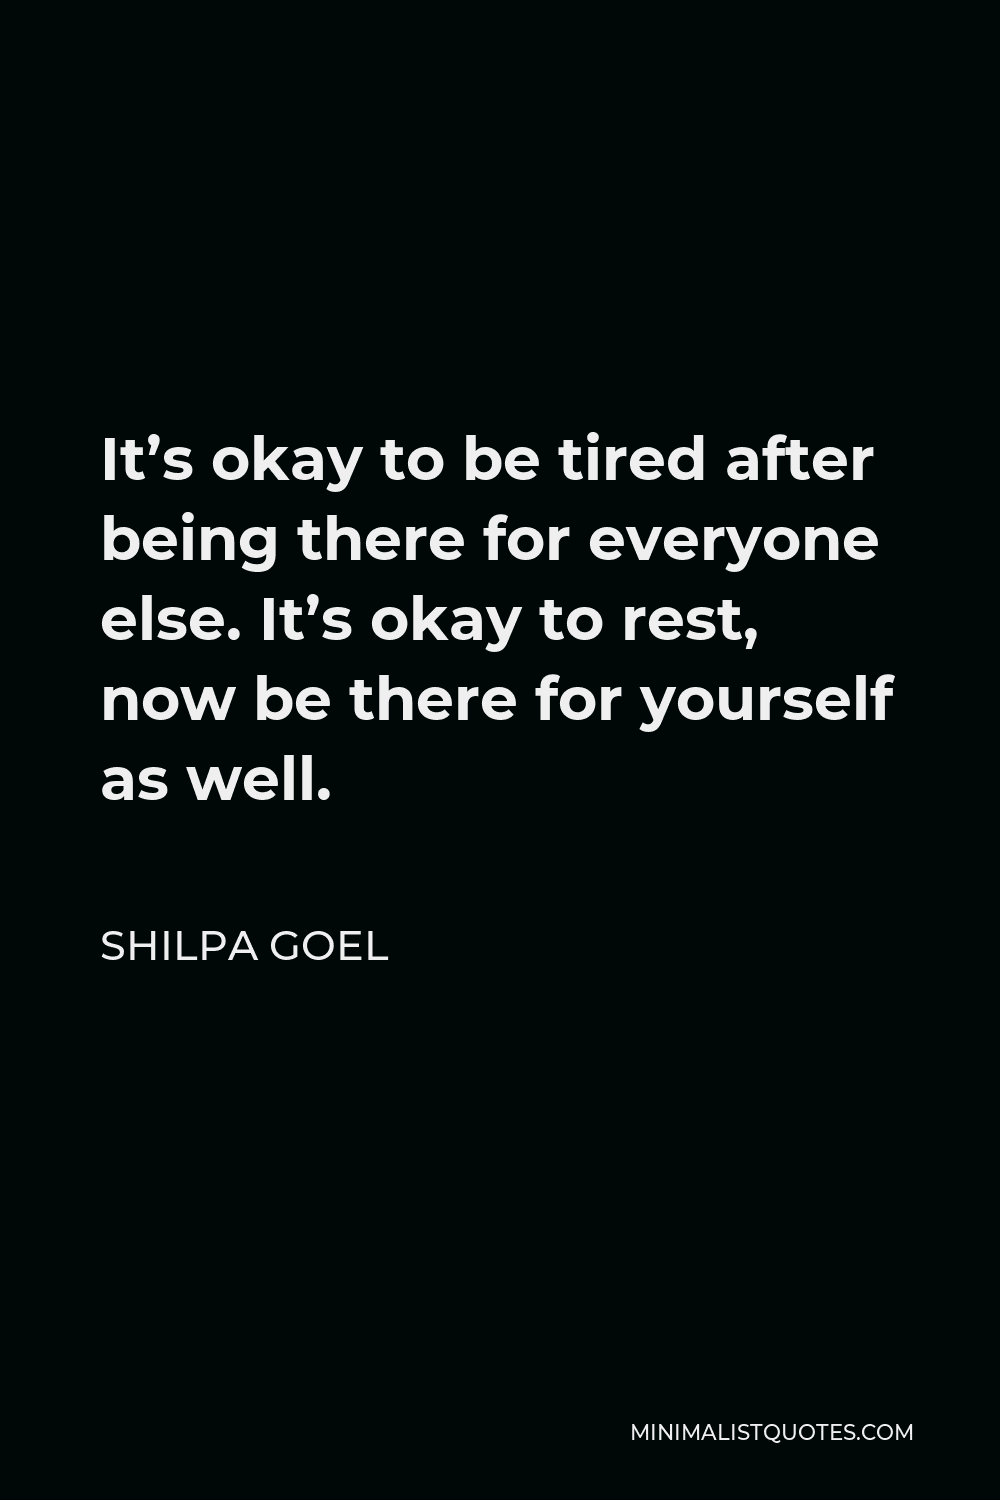 Shilpa Goel Quote - It’s okay to be tired after being there for everyone else. It’s okay to rest, now be there for yourself as well.